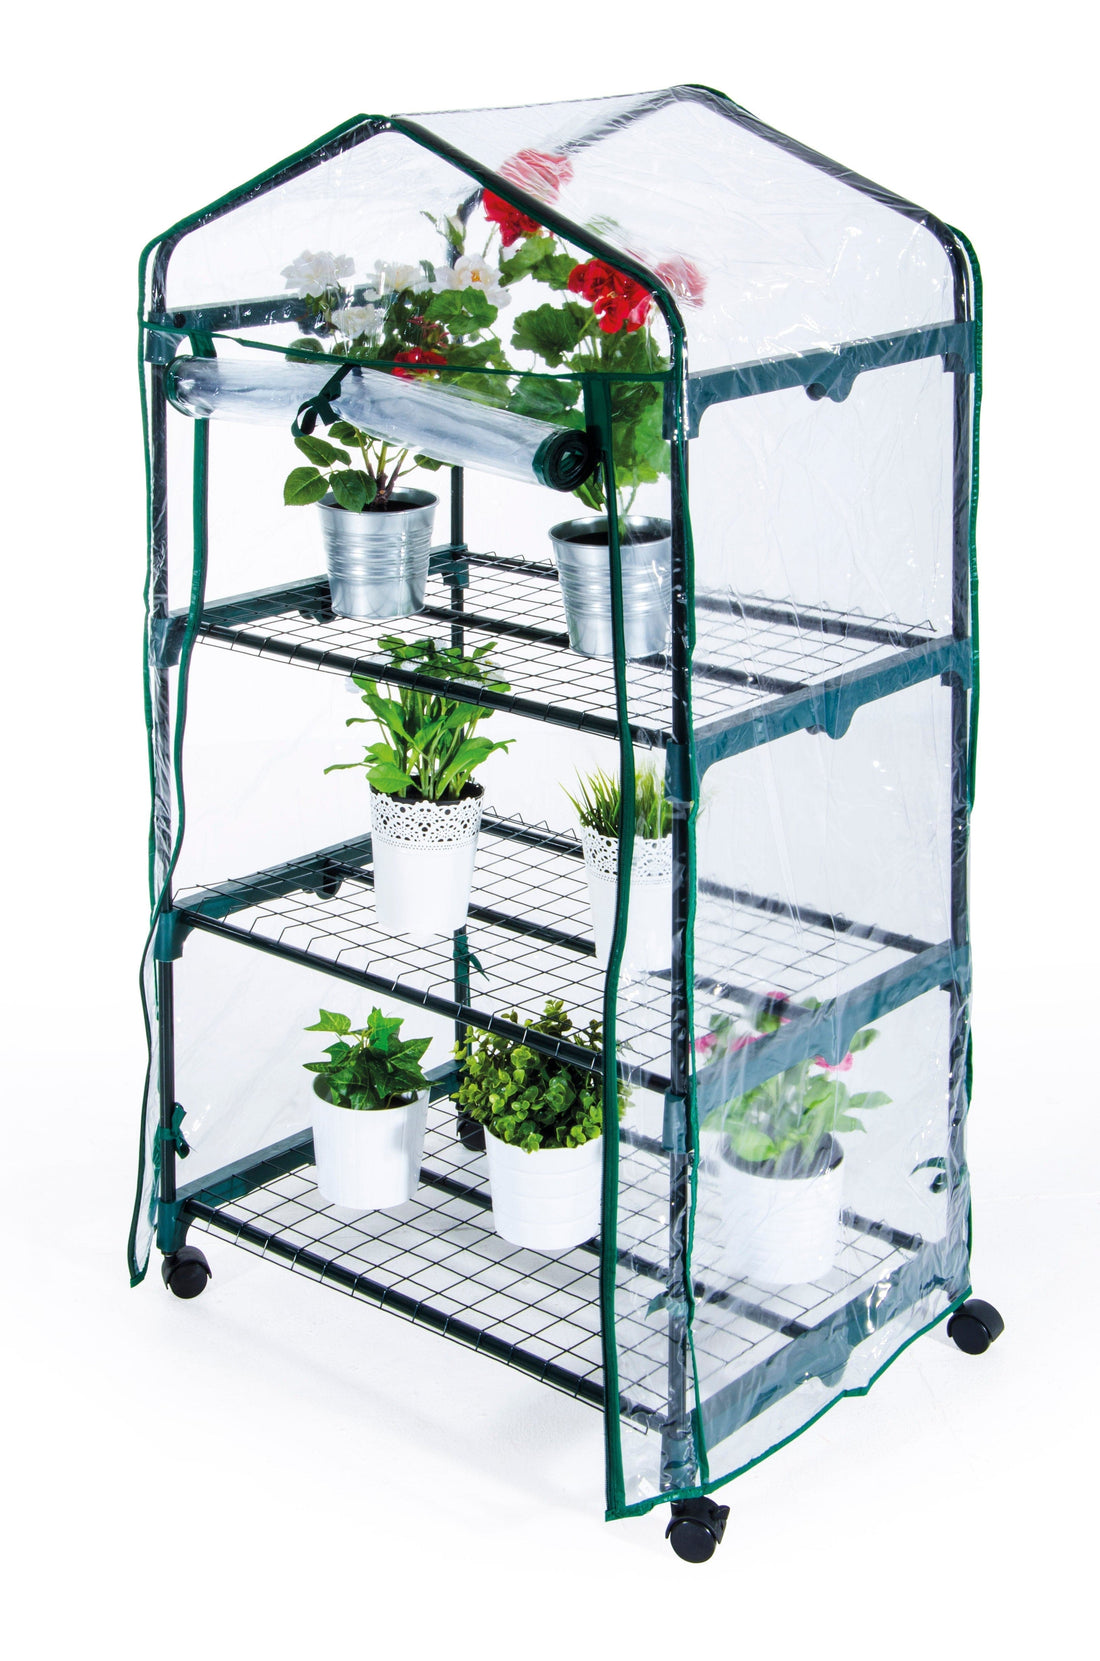 RECTANGULAR GREENHOUSE 3 SHELVES WITH WHEELS 69X49XH128 CM, CANVAS INCLUDED